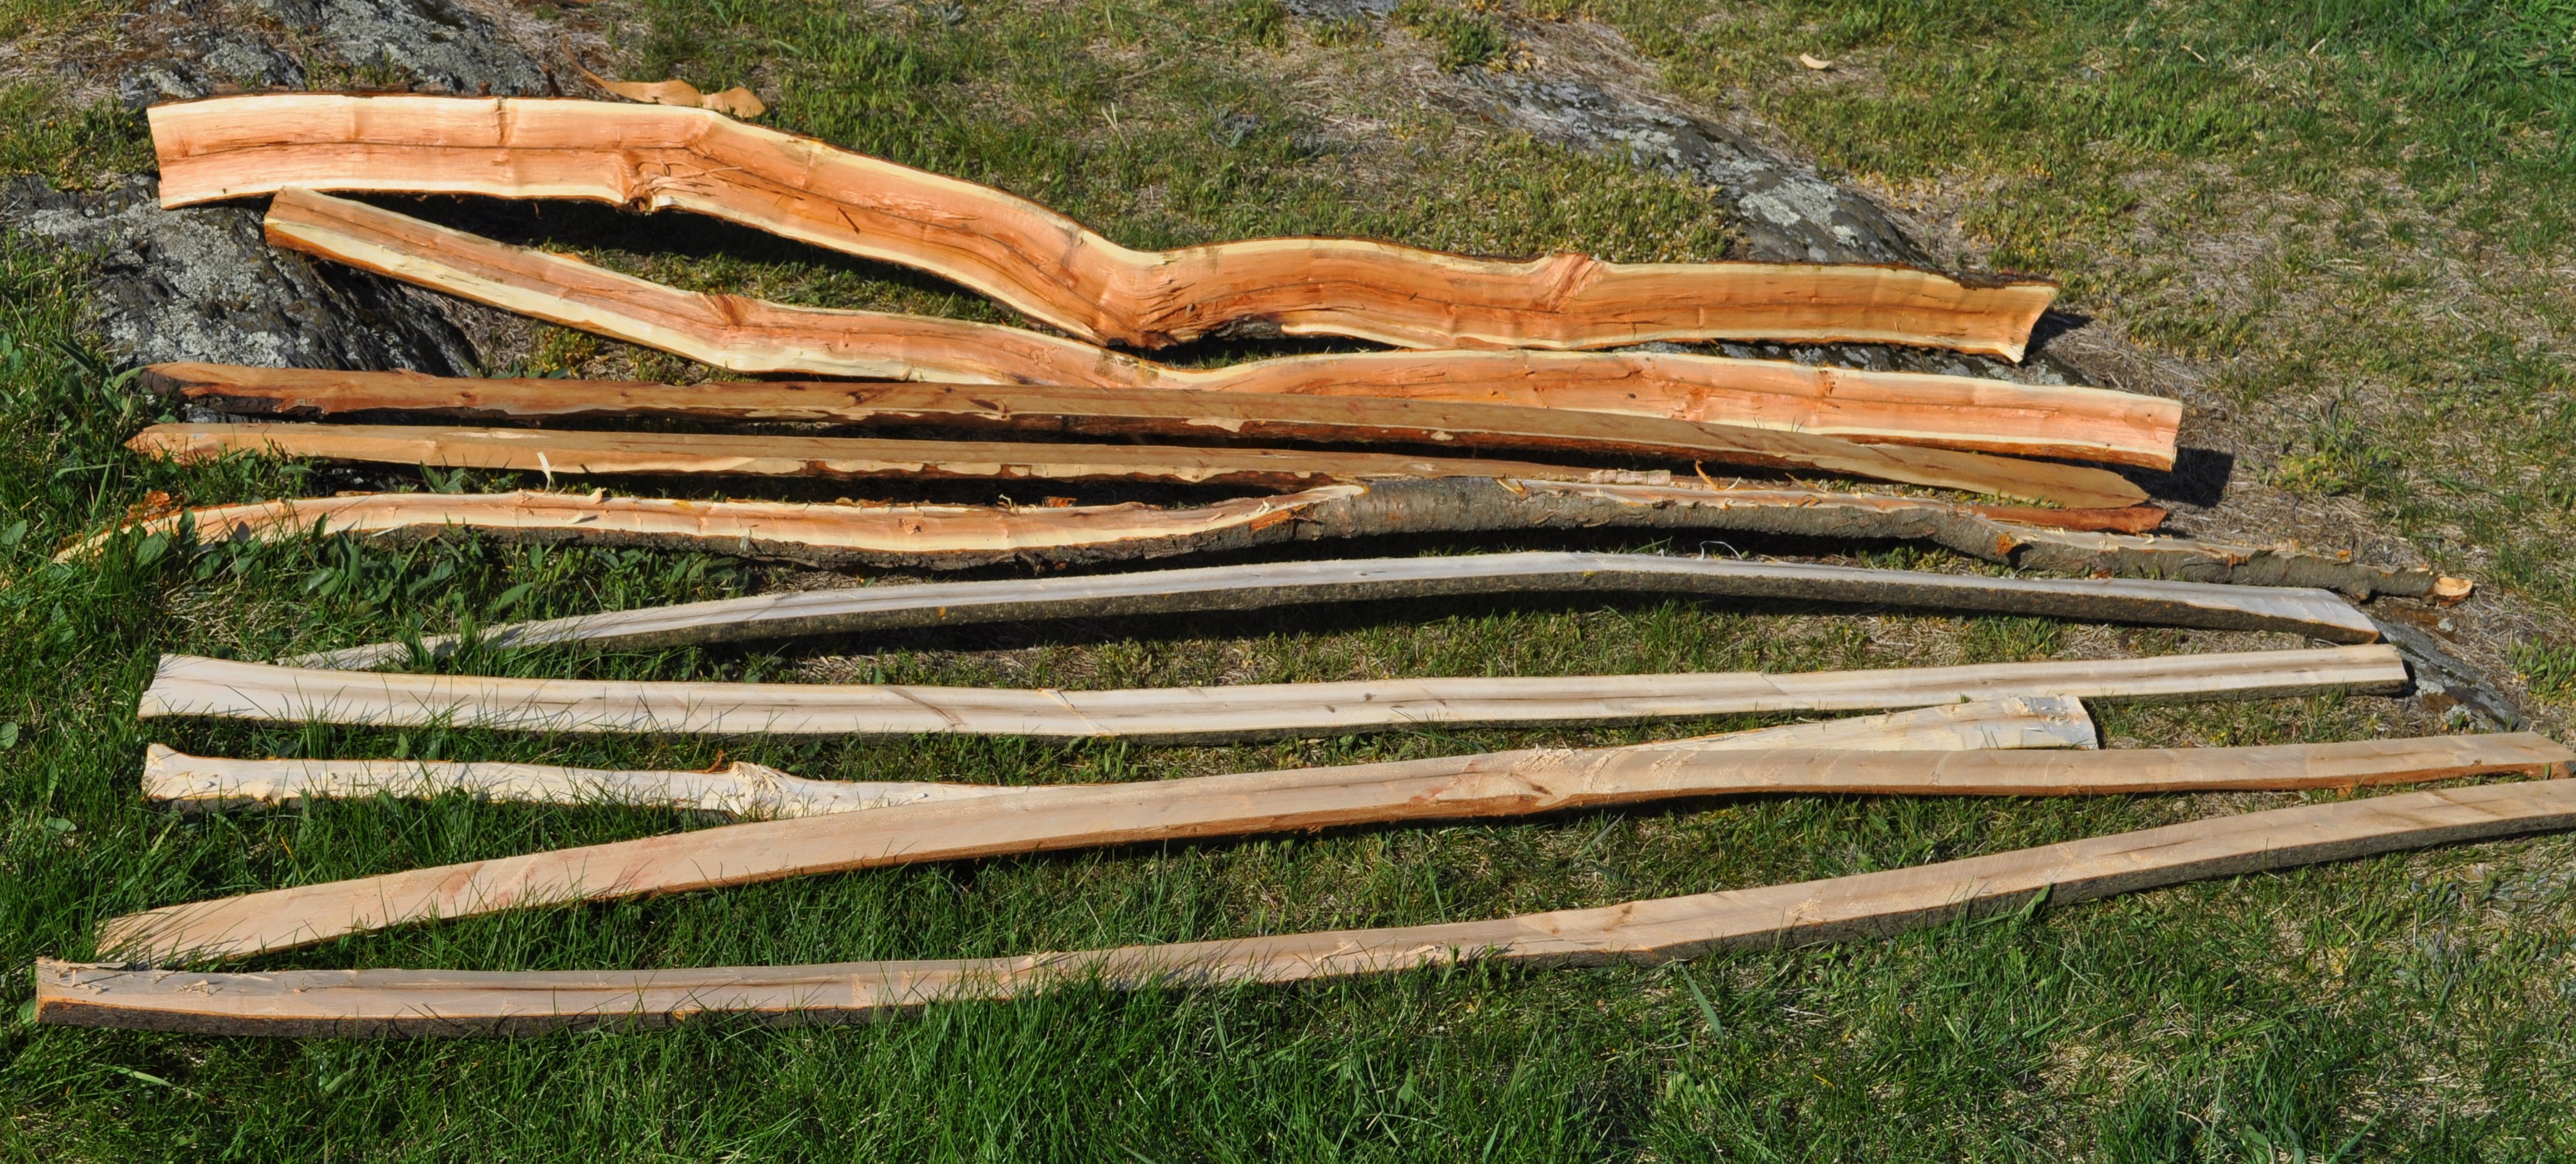 File:bow Staves.jpg - Wikimedia Commons